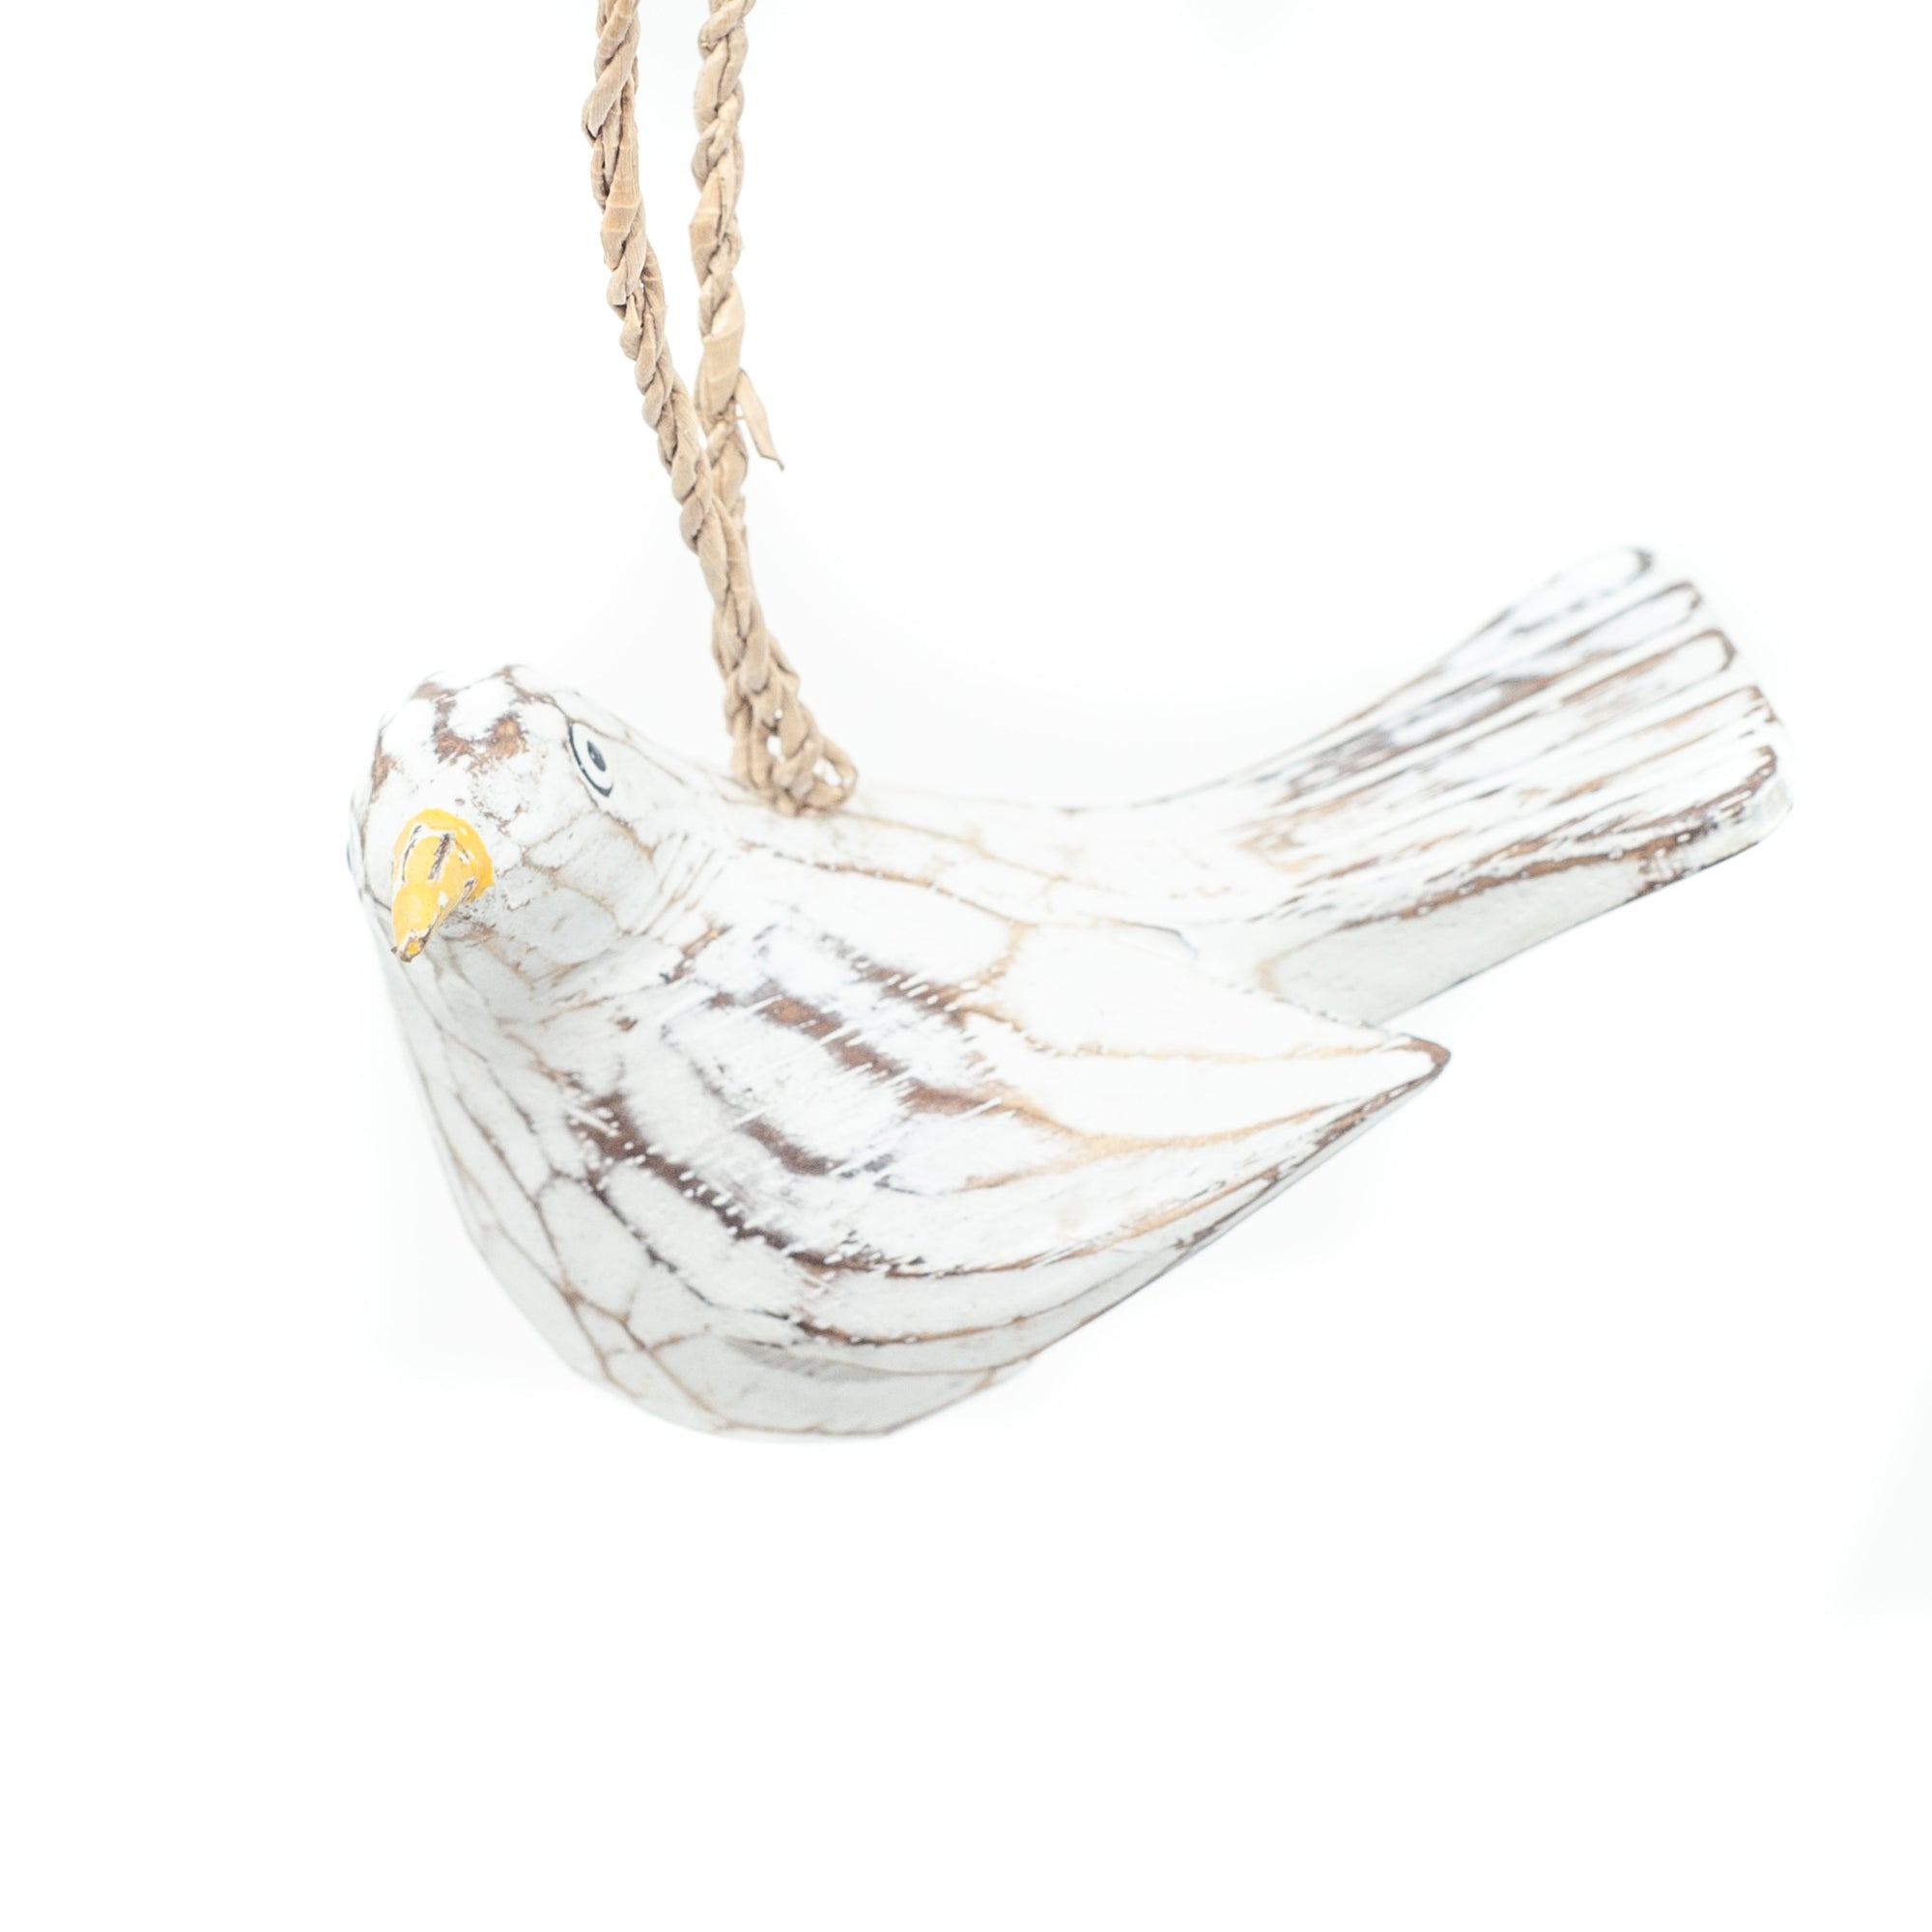 Small driftwood bird ornament on white background hanging from string. 